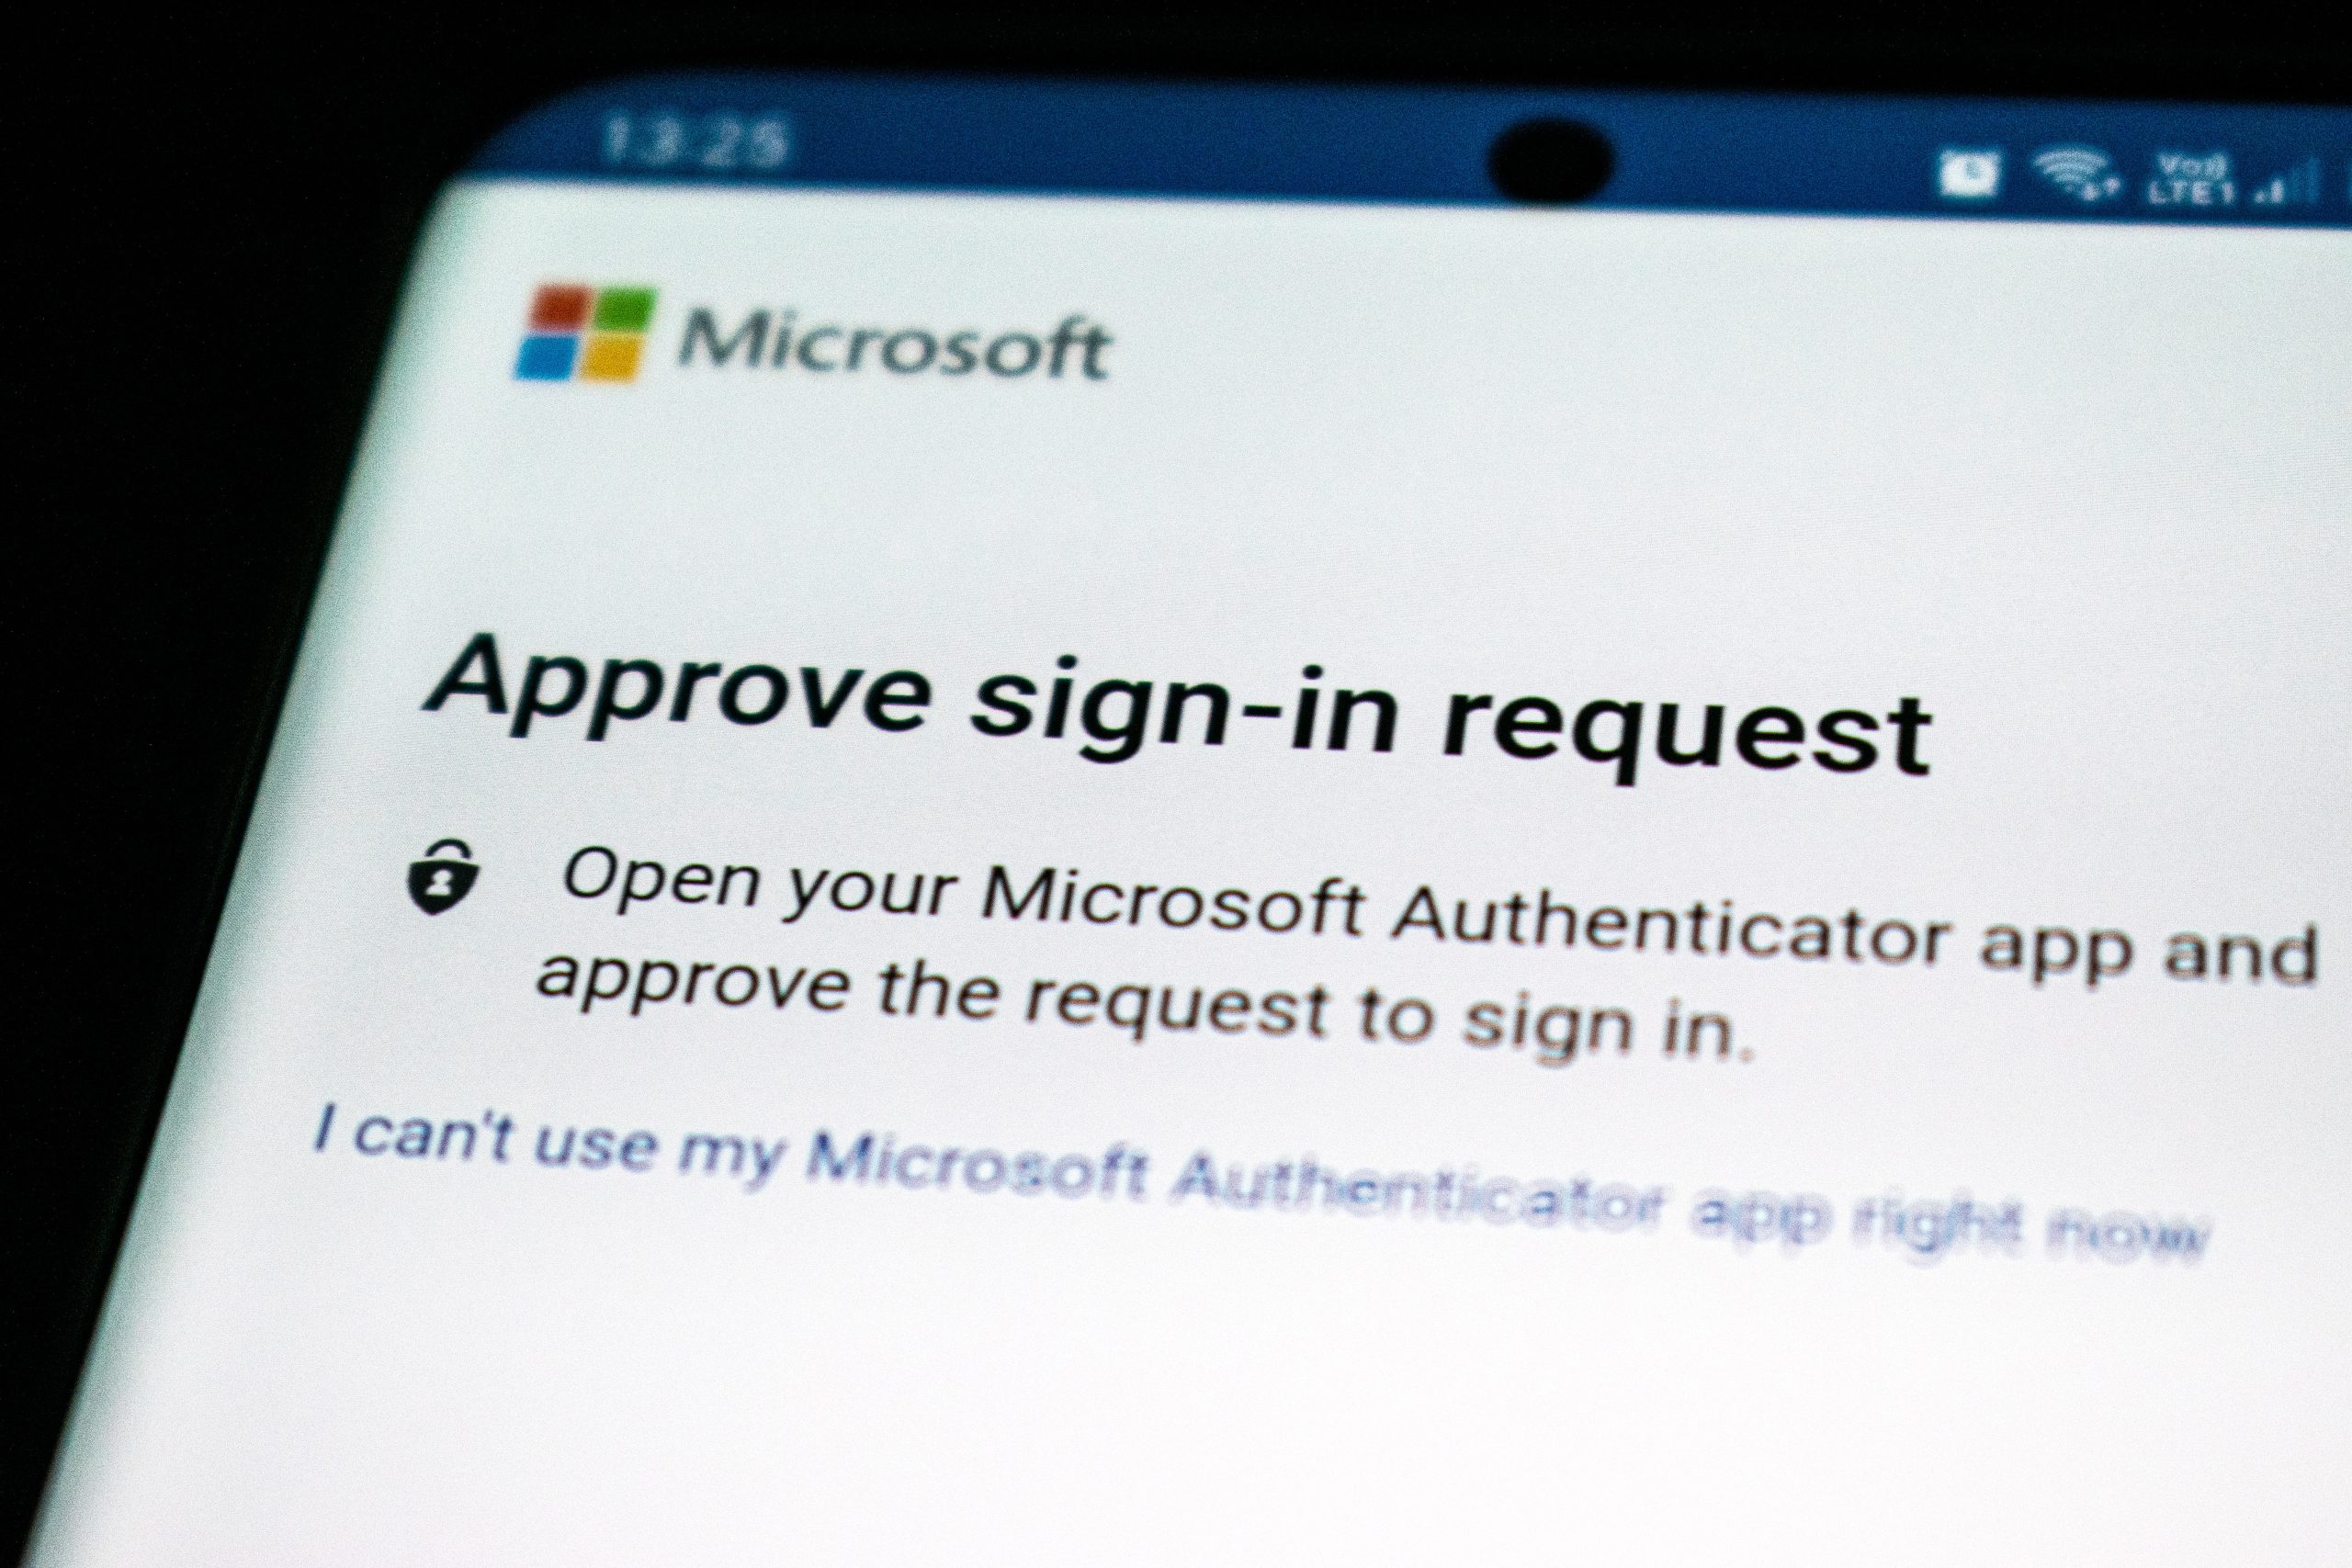 Microsoft app asking a user to approve a sign-in request